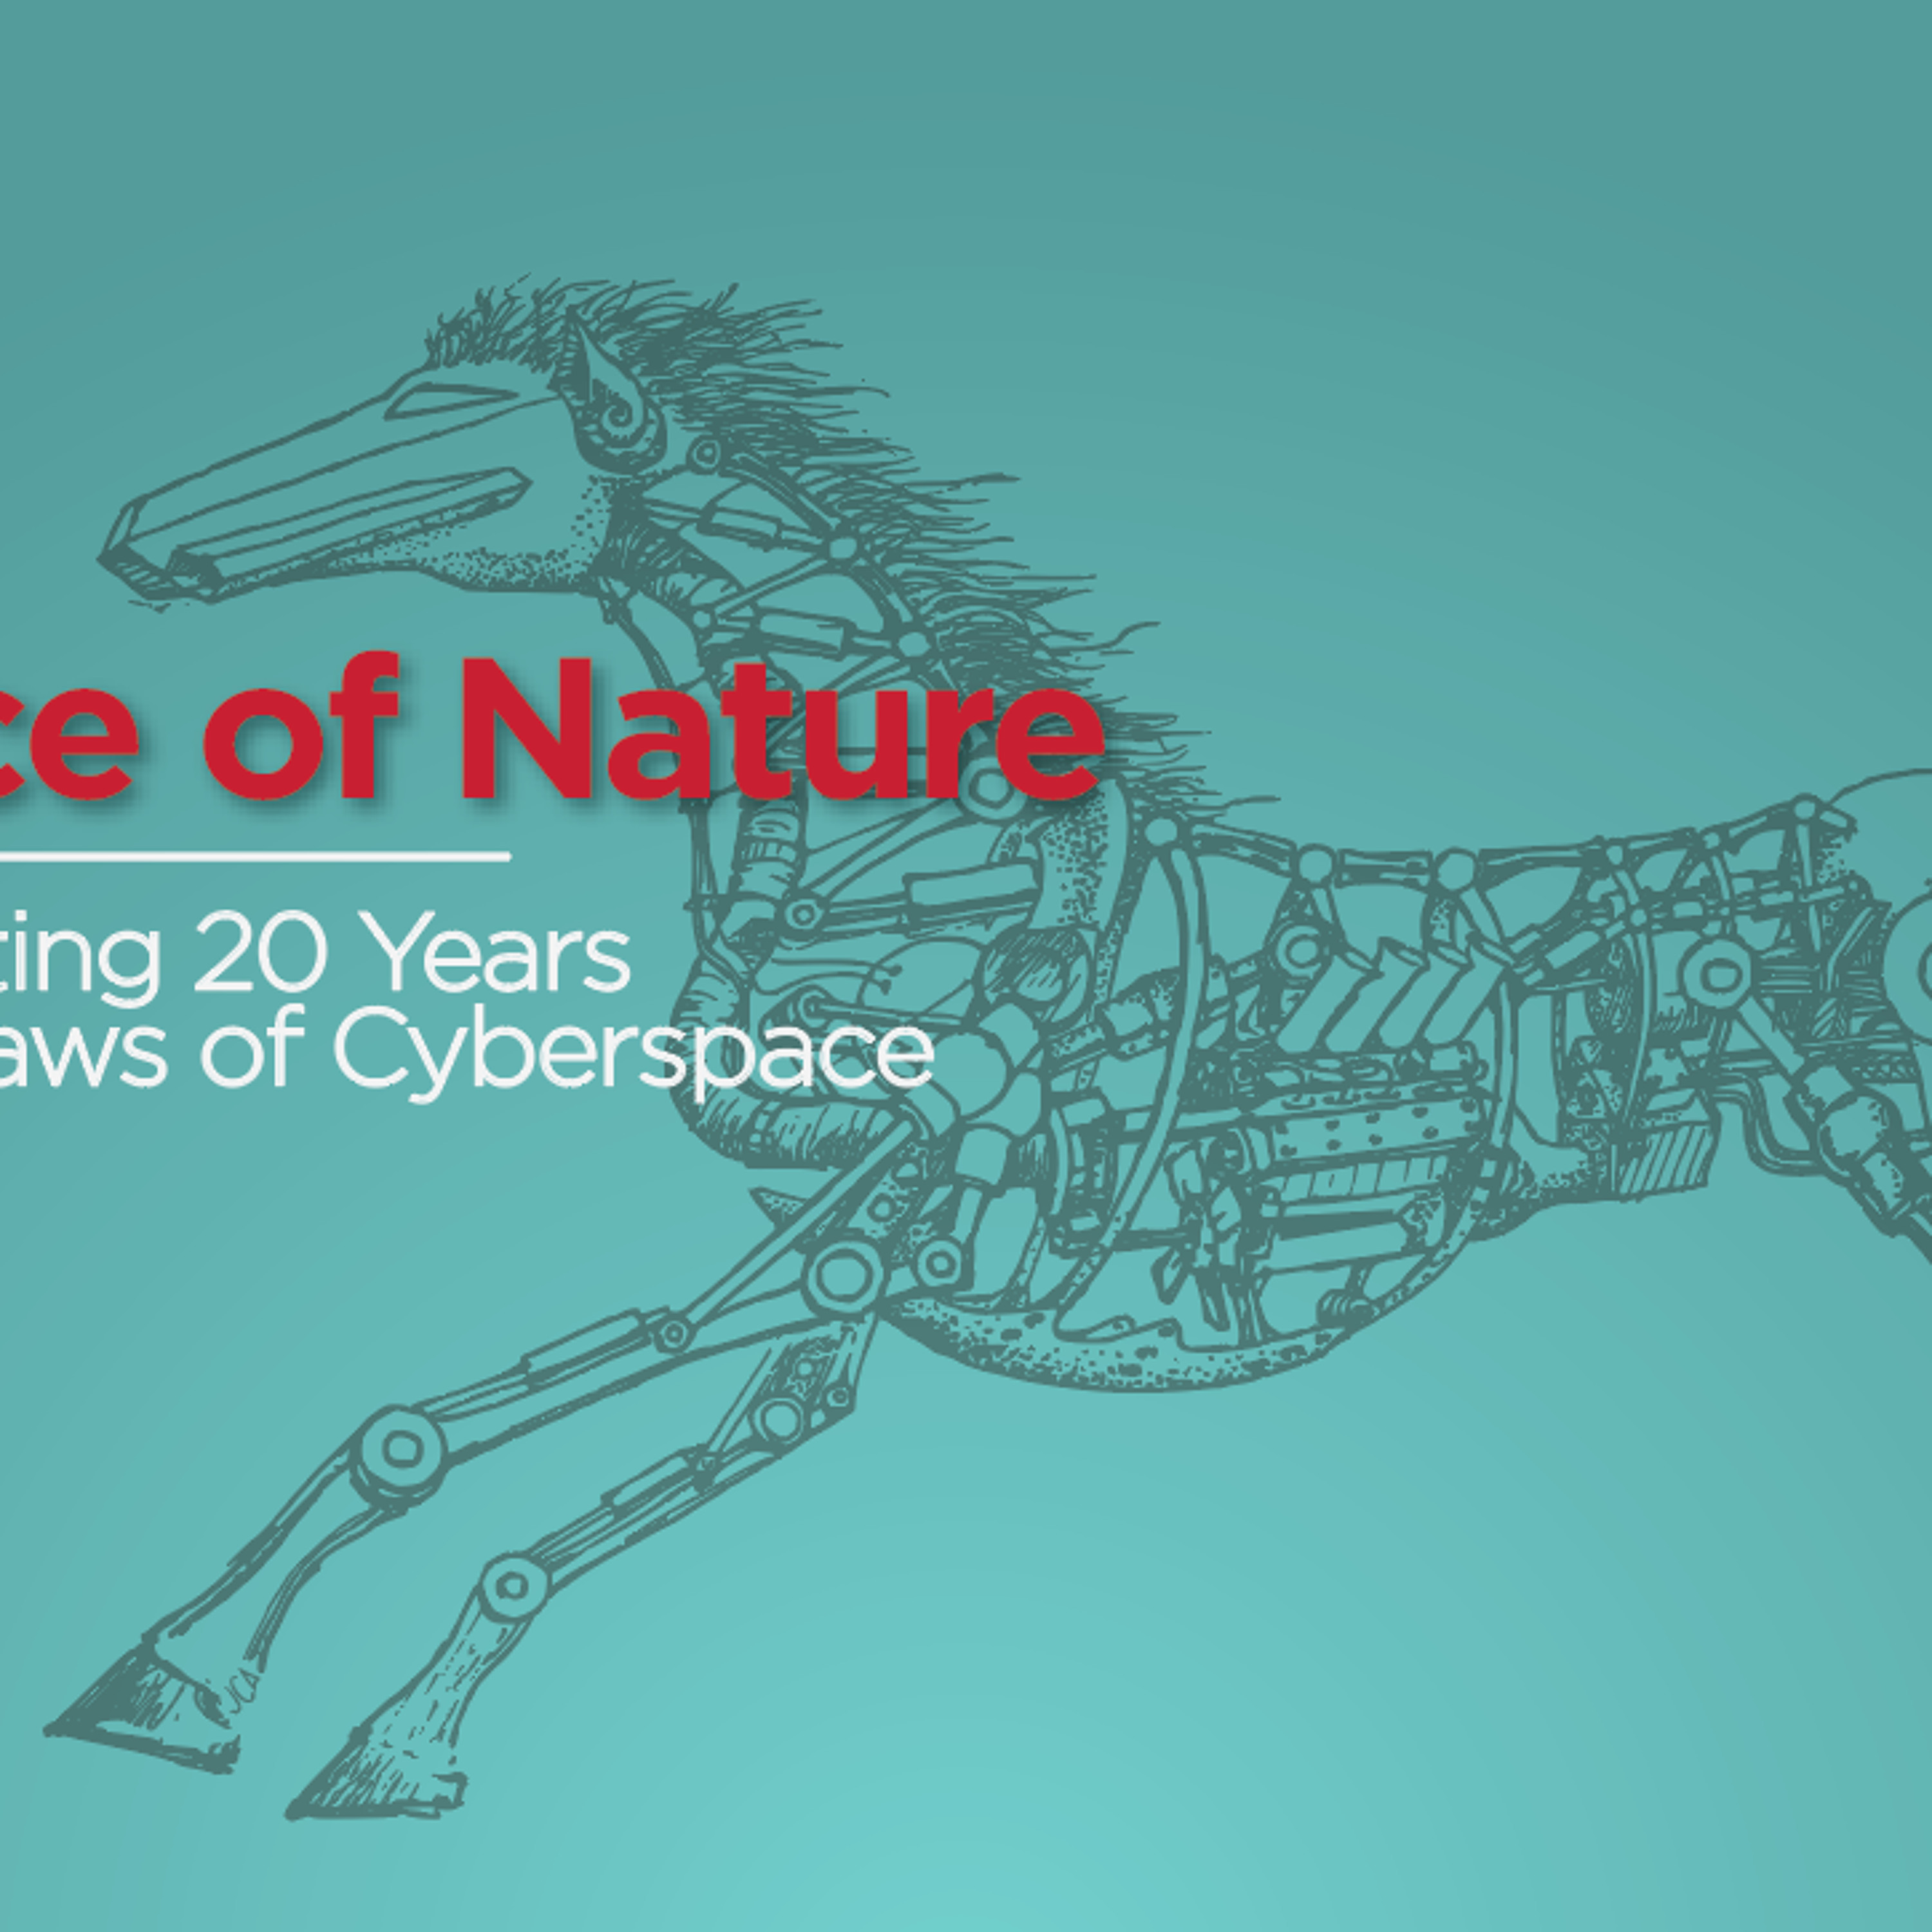 Force of Nature: Celebrating 20 Years of the Laws of Cyberspace